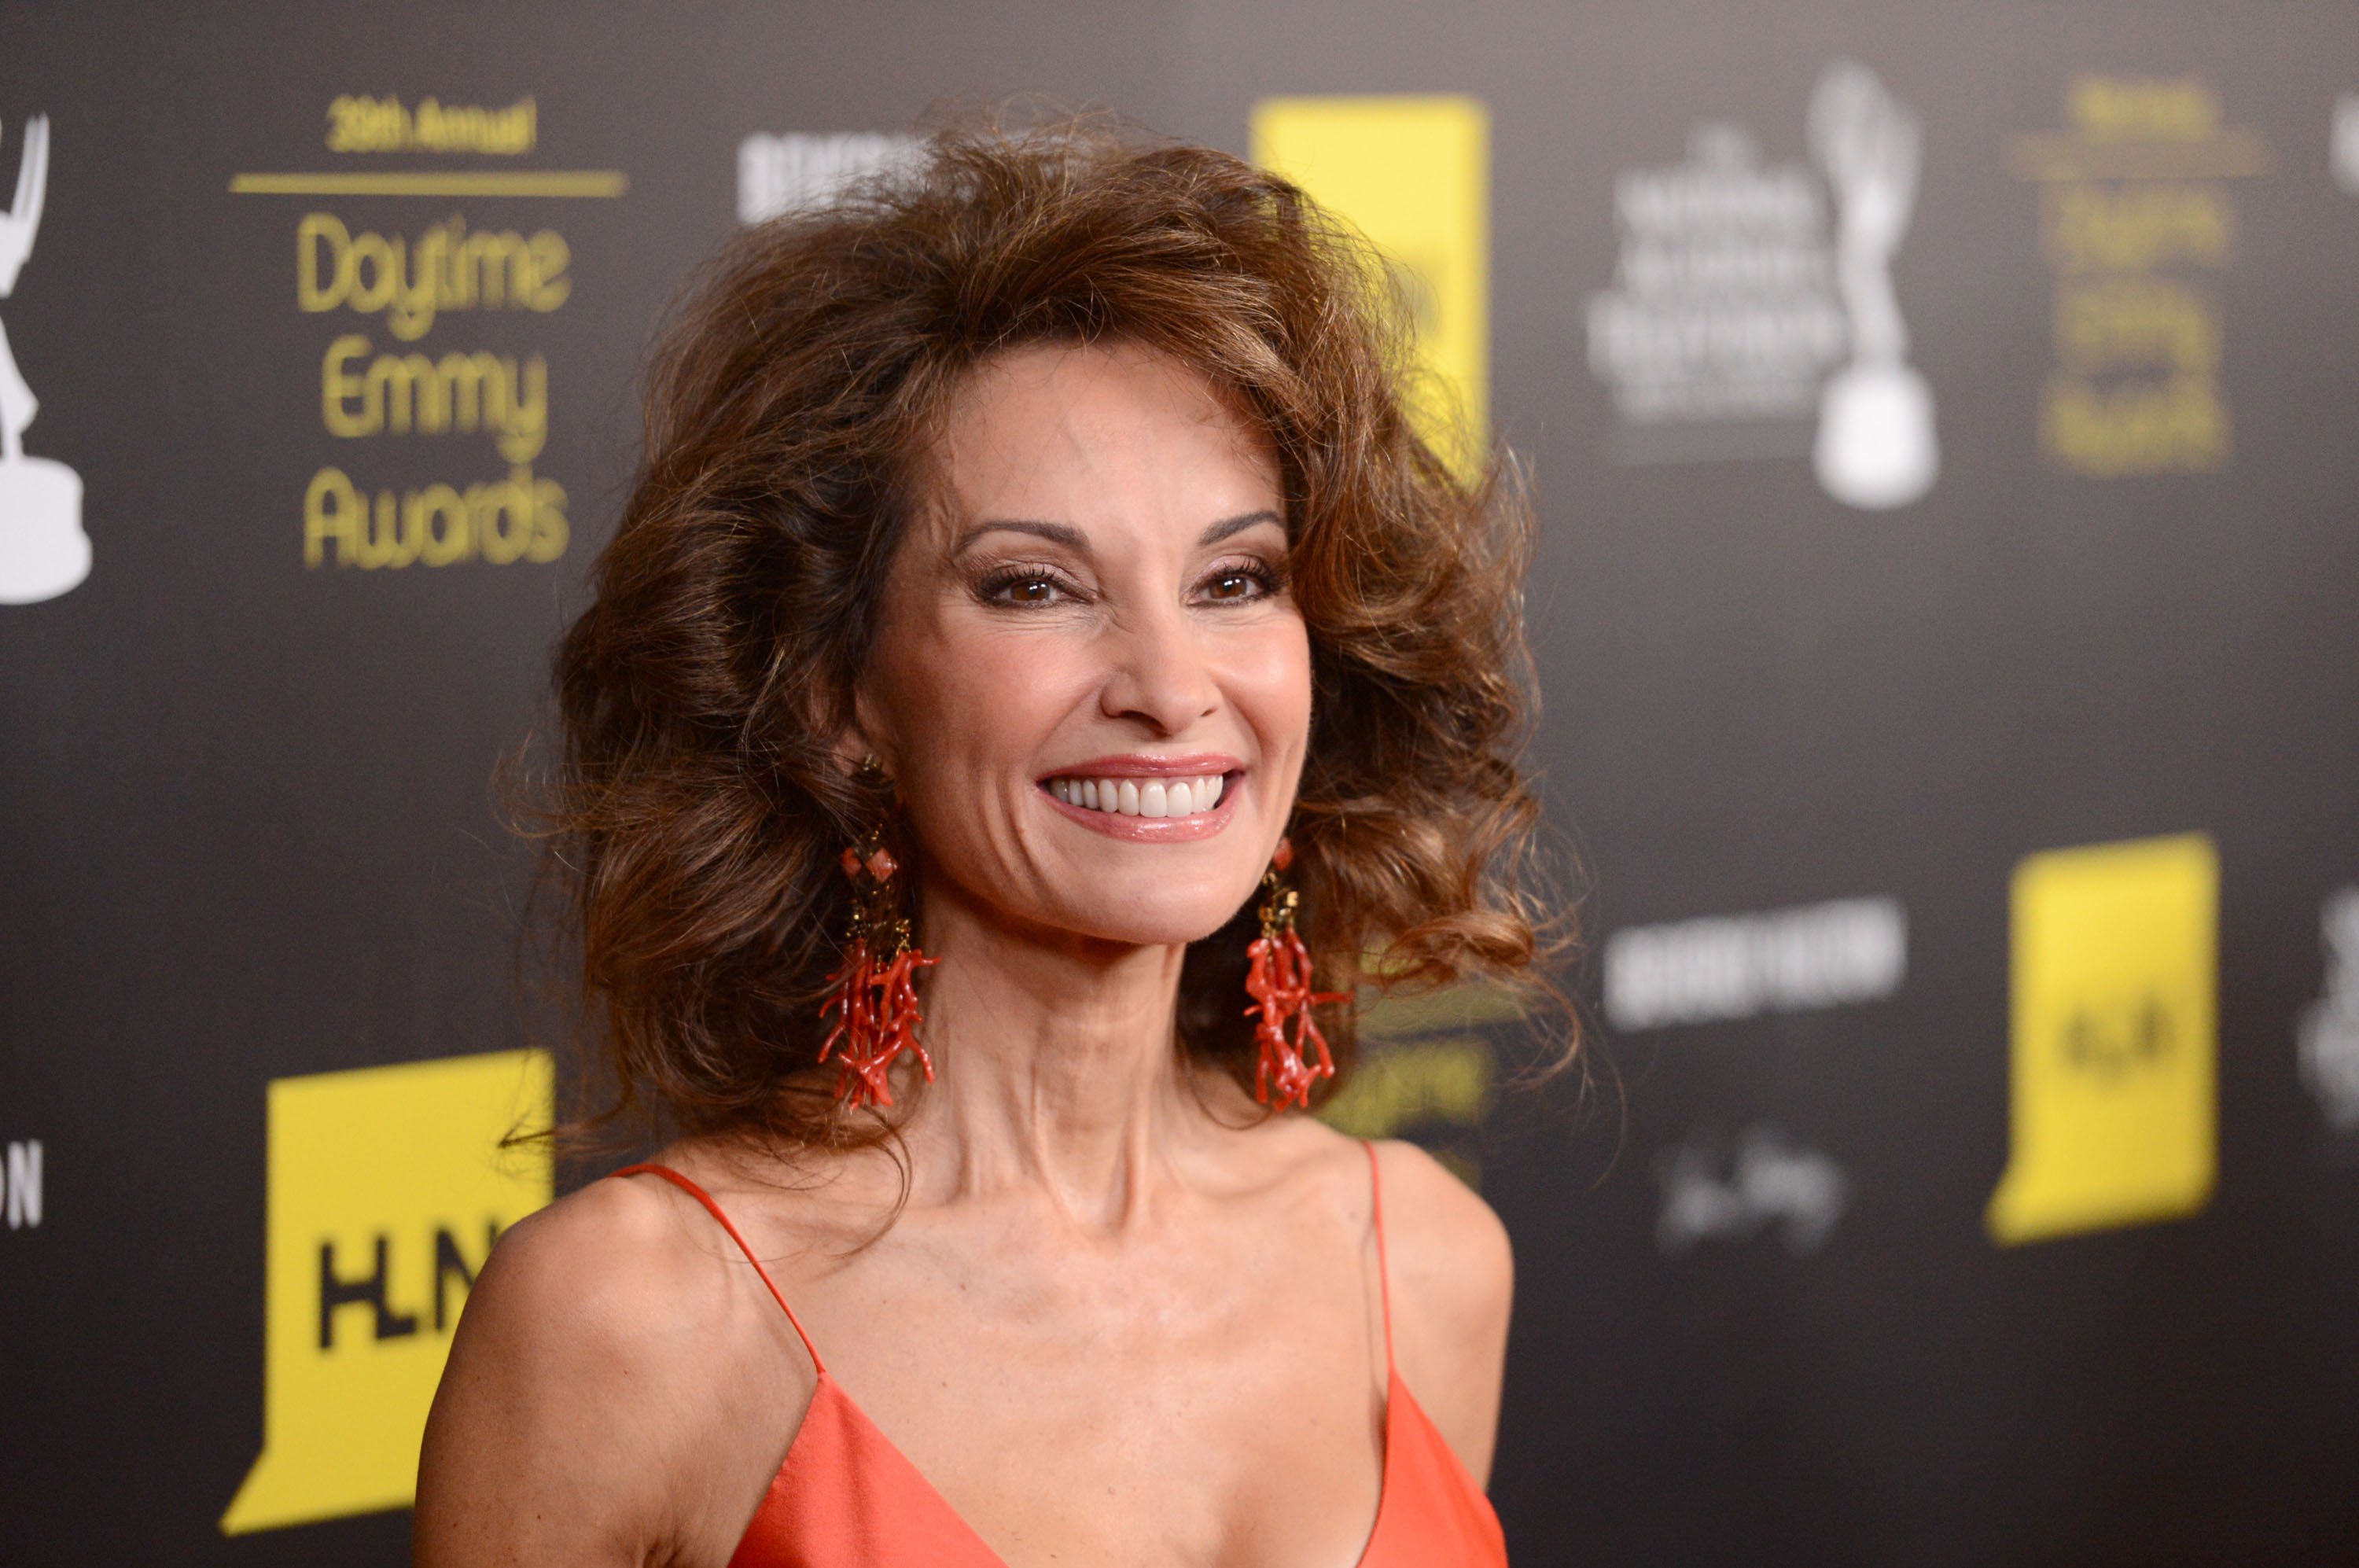 Susan Lucci arrives at The 39th Annual Daytime Emmy Awards broadcasted on HLN held at The Beverly Hilton Hotel on June 23, 2012 in Beverly Hills, California | Photo: Getty Images